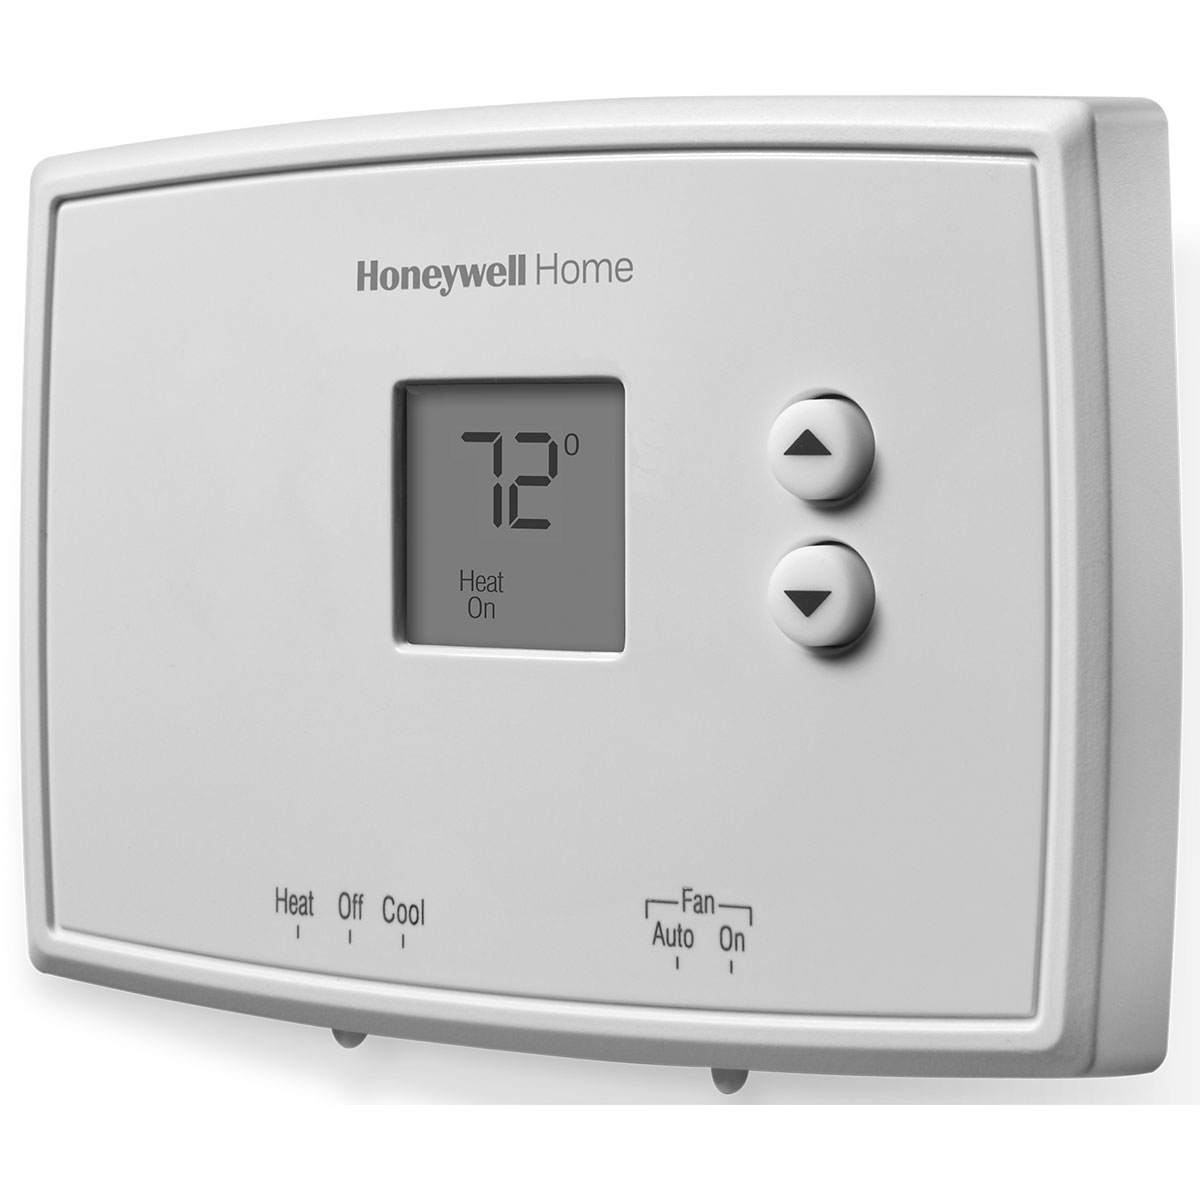 Honeywell Thermostat How To Reset Honeywell RTH111B1024 Digital Non-ProgrammableThermostat For Heating &  Cooling | Honeywell Store